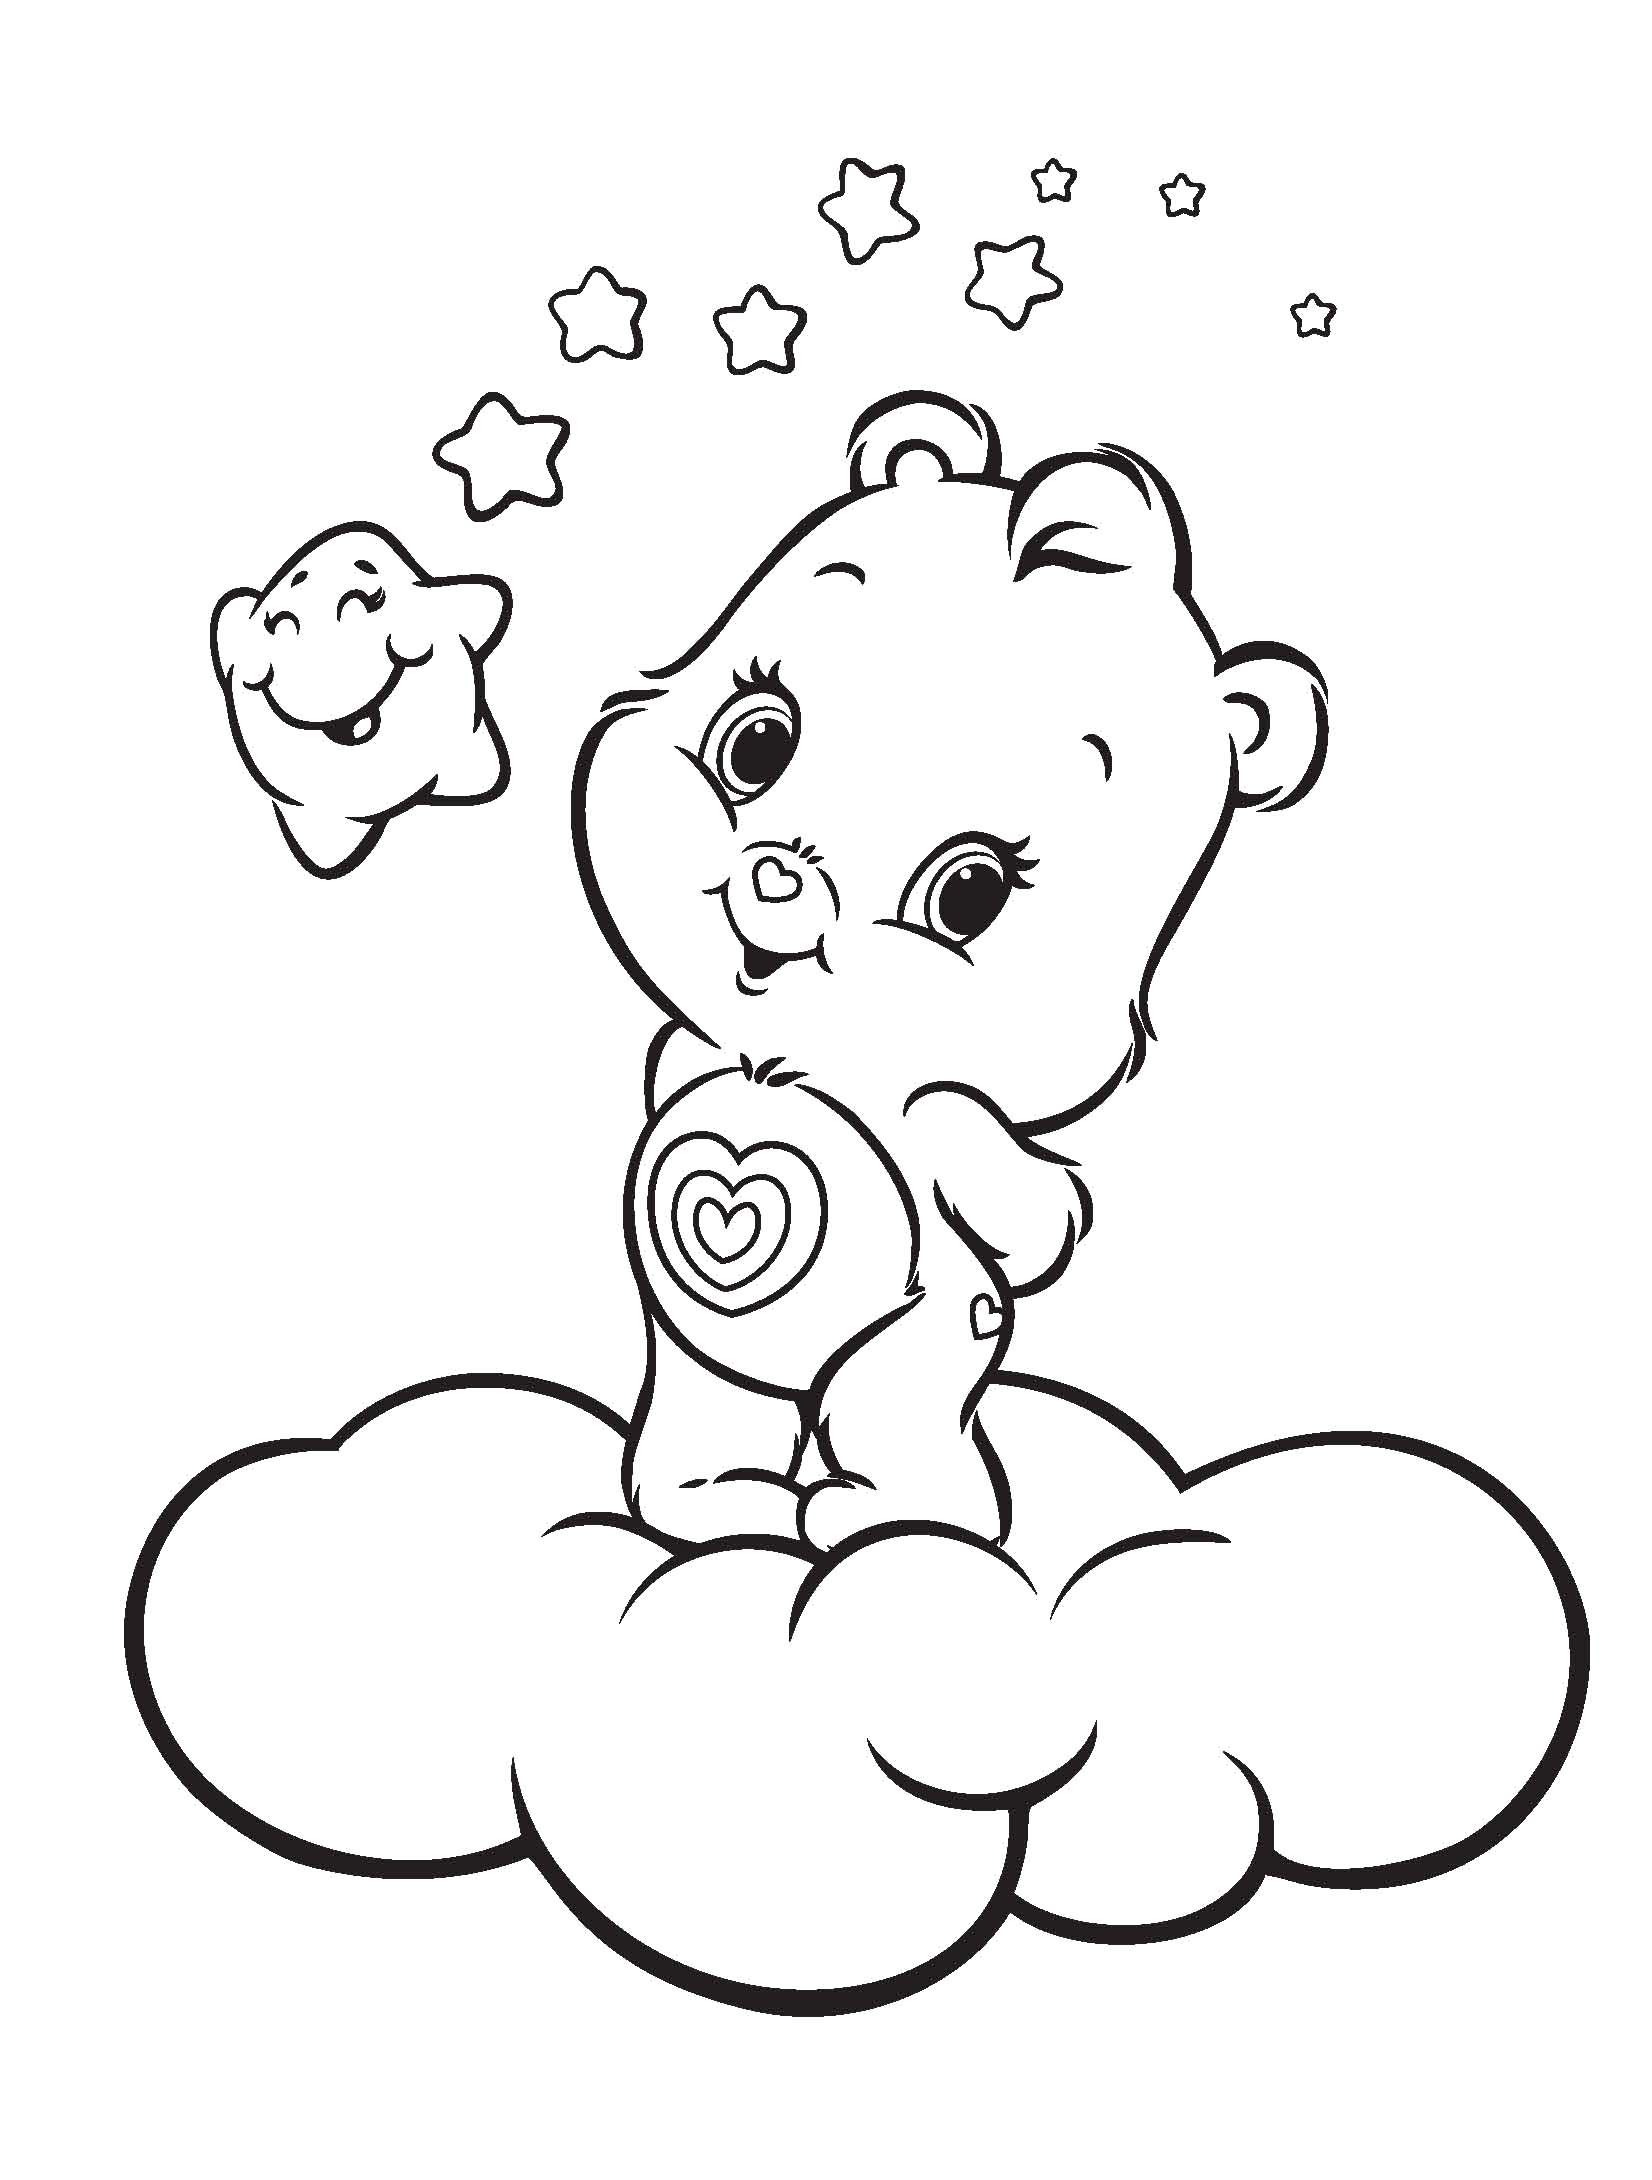 Little bear - Bears Kids Coloring Pages